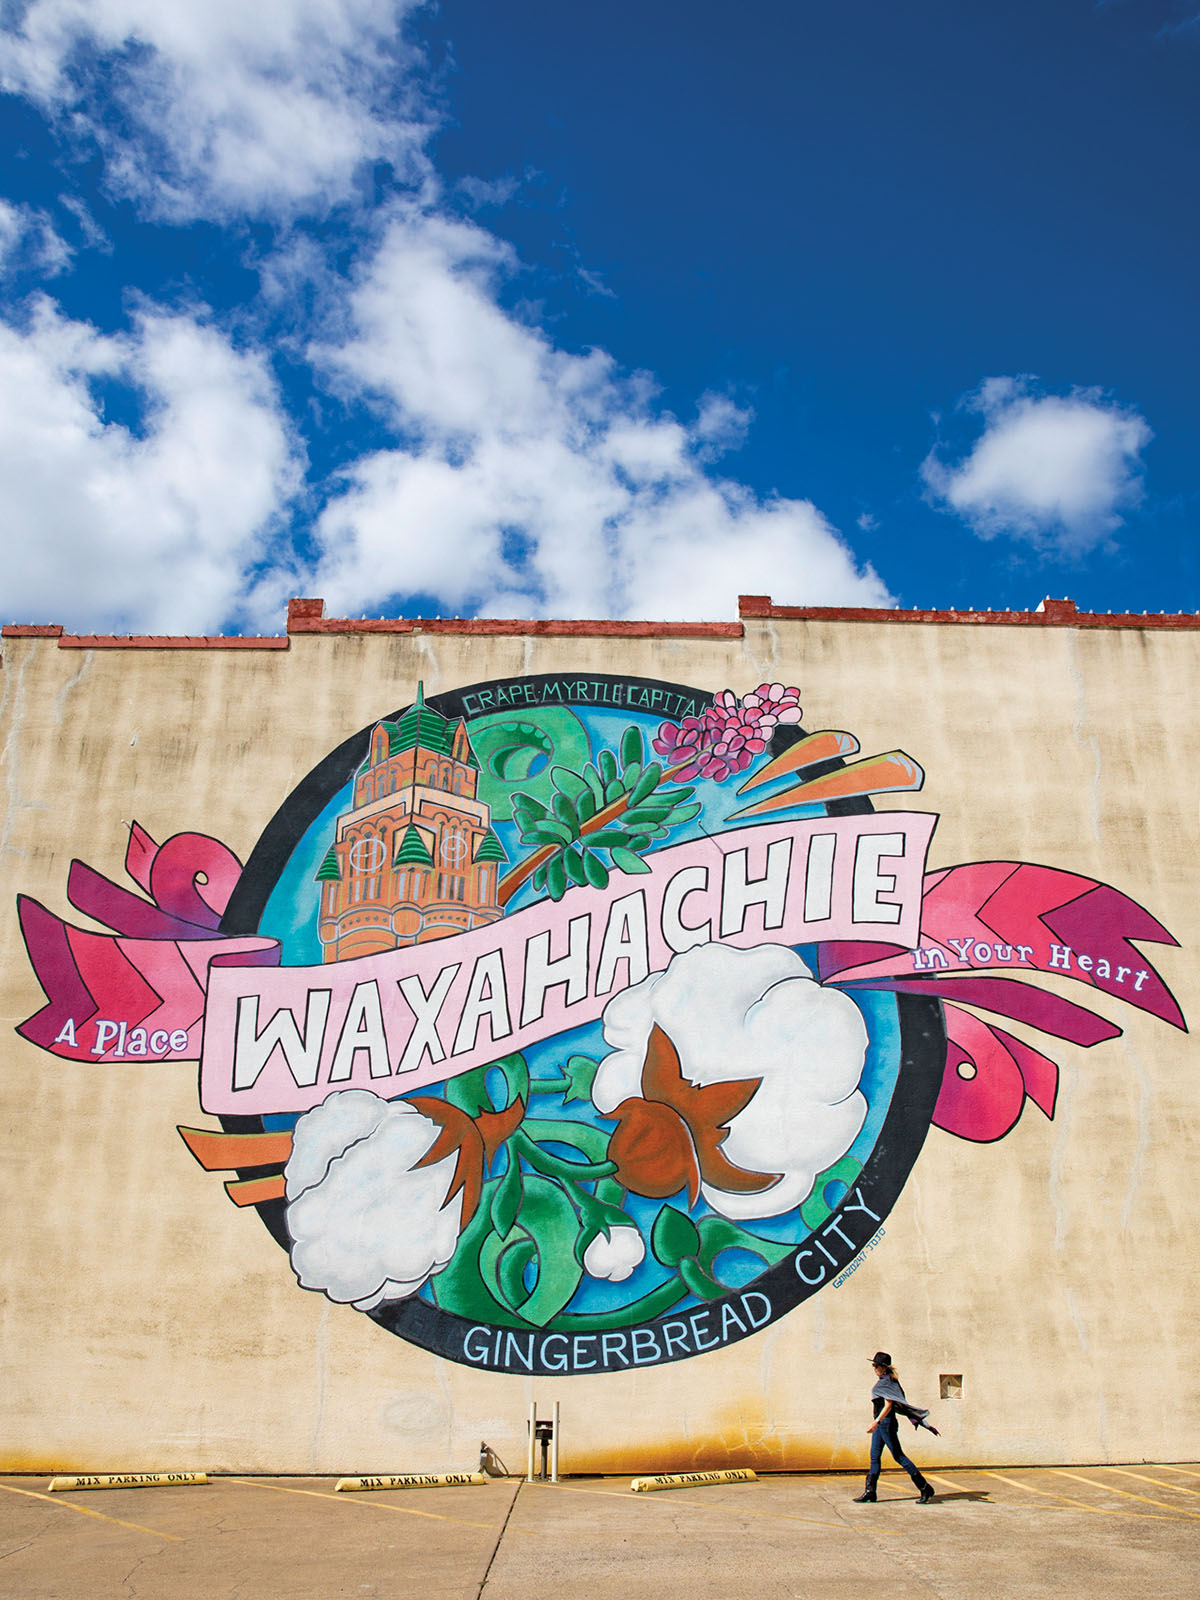 A person walks in front of a grey concrete building with a brightly-colored mural reading 'Waxahachie Gingerbread City' on the front